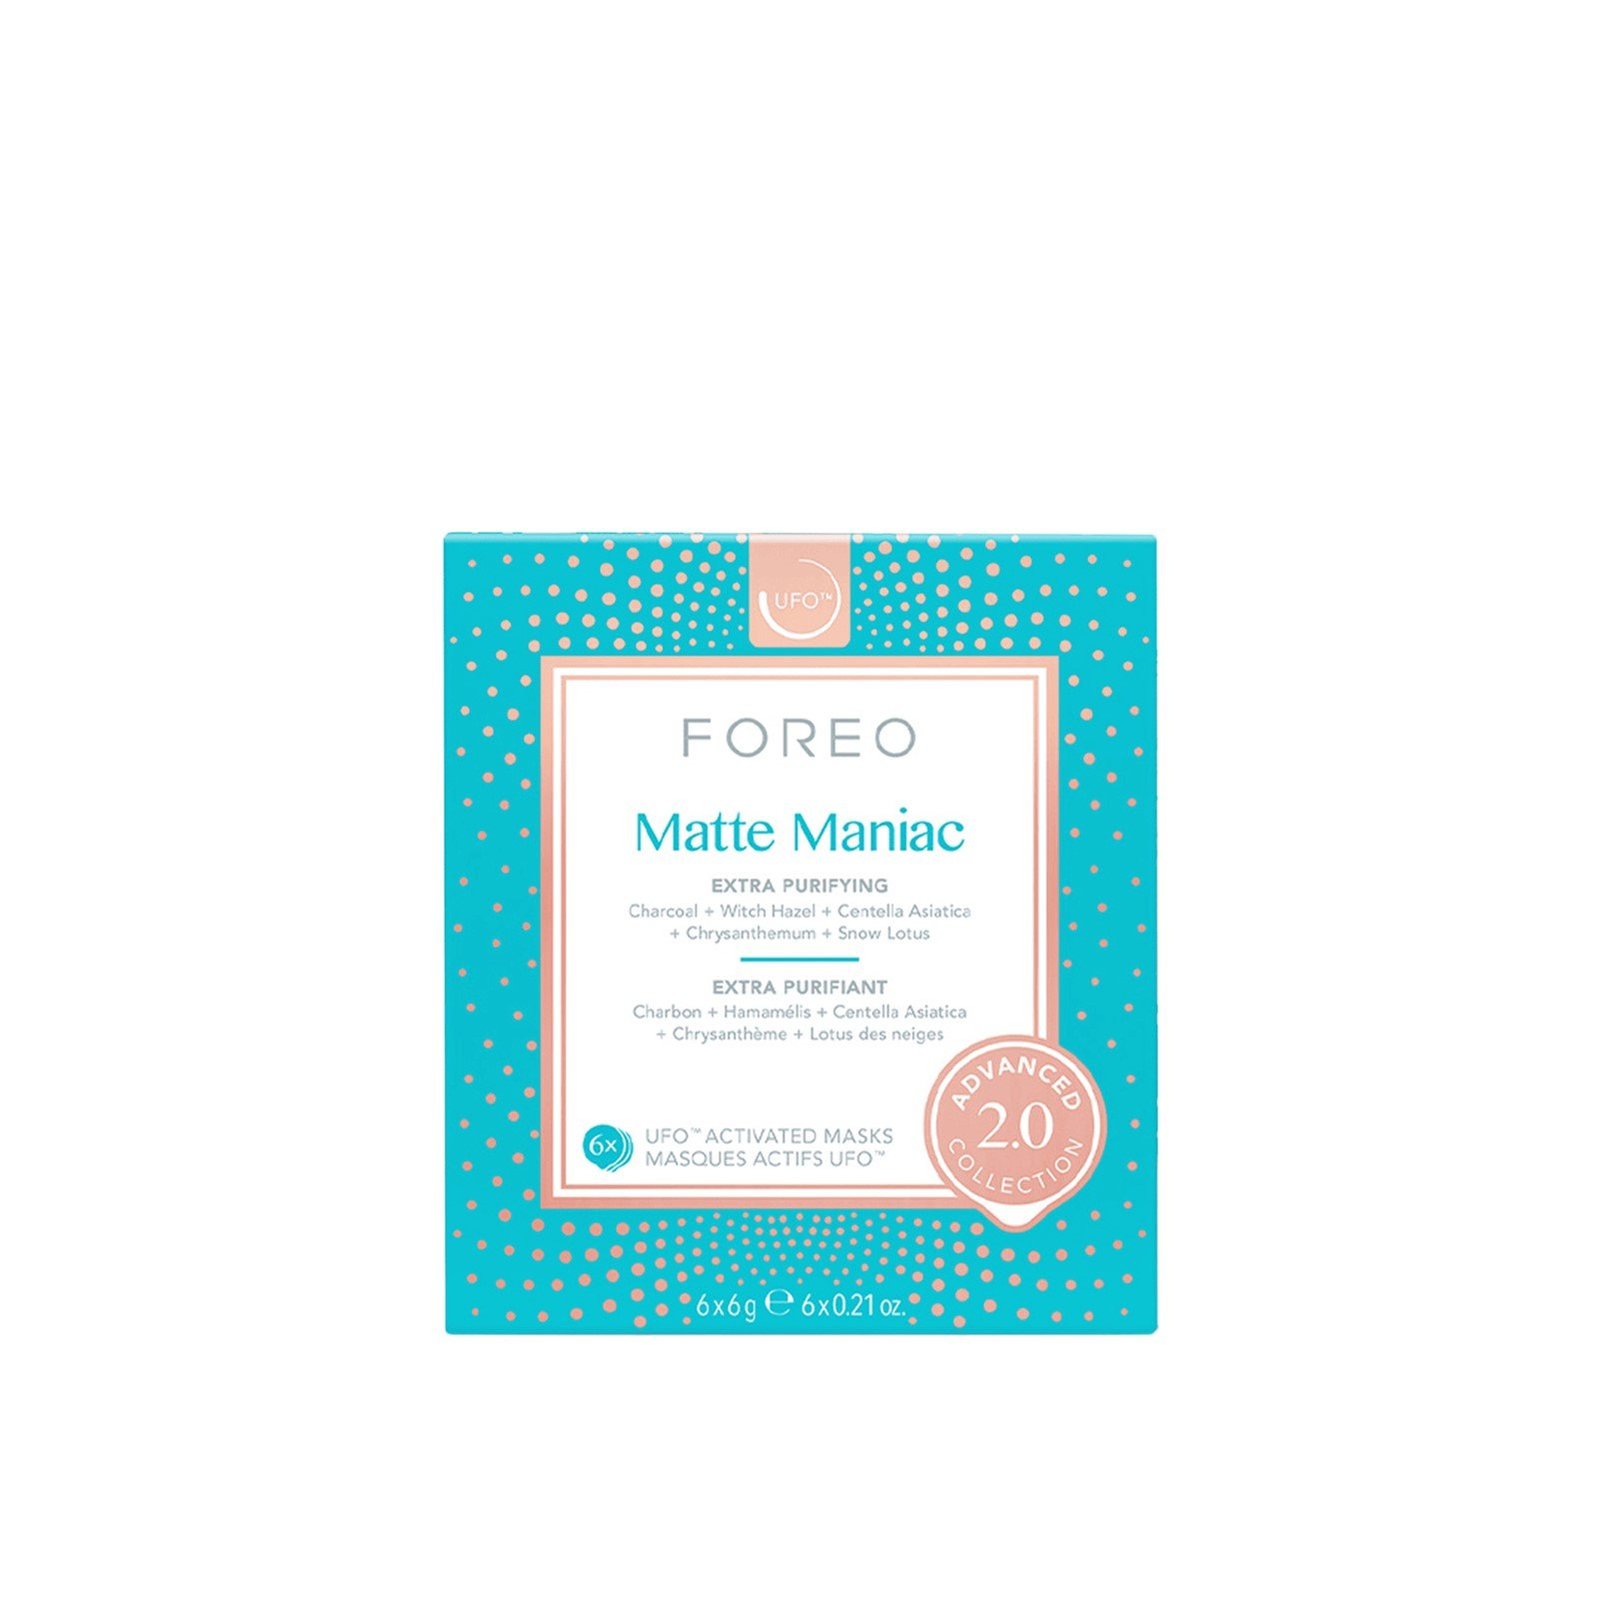 FOREO UFO™ Activated Facial Mask Matte Maniac 2.0 6x6g (0.21oz x6)